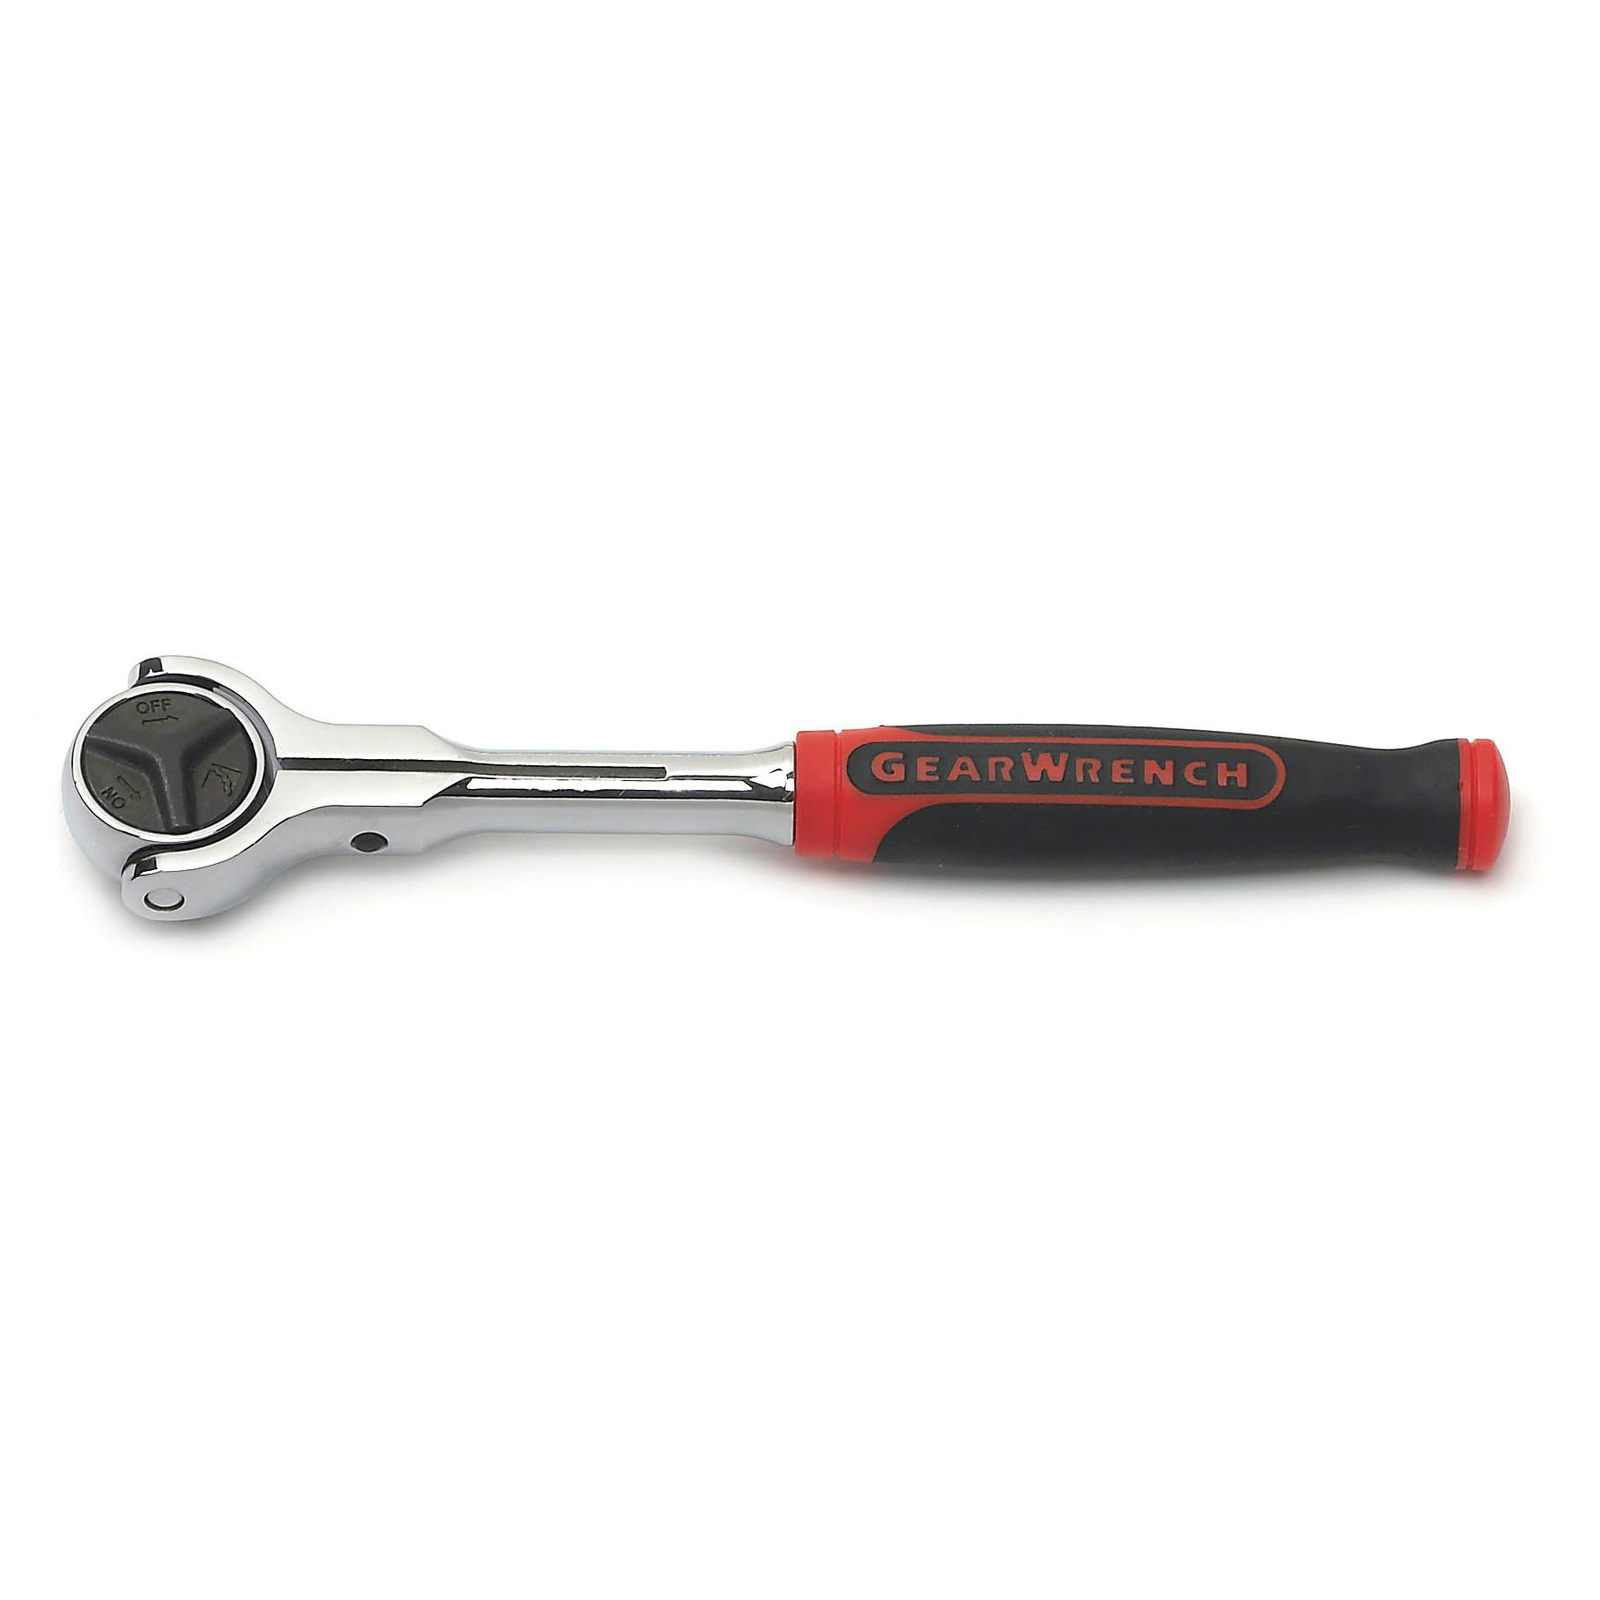 GearWrench 1/4 Drive Cushion Grip Roto Ratchet 81224